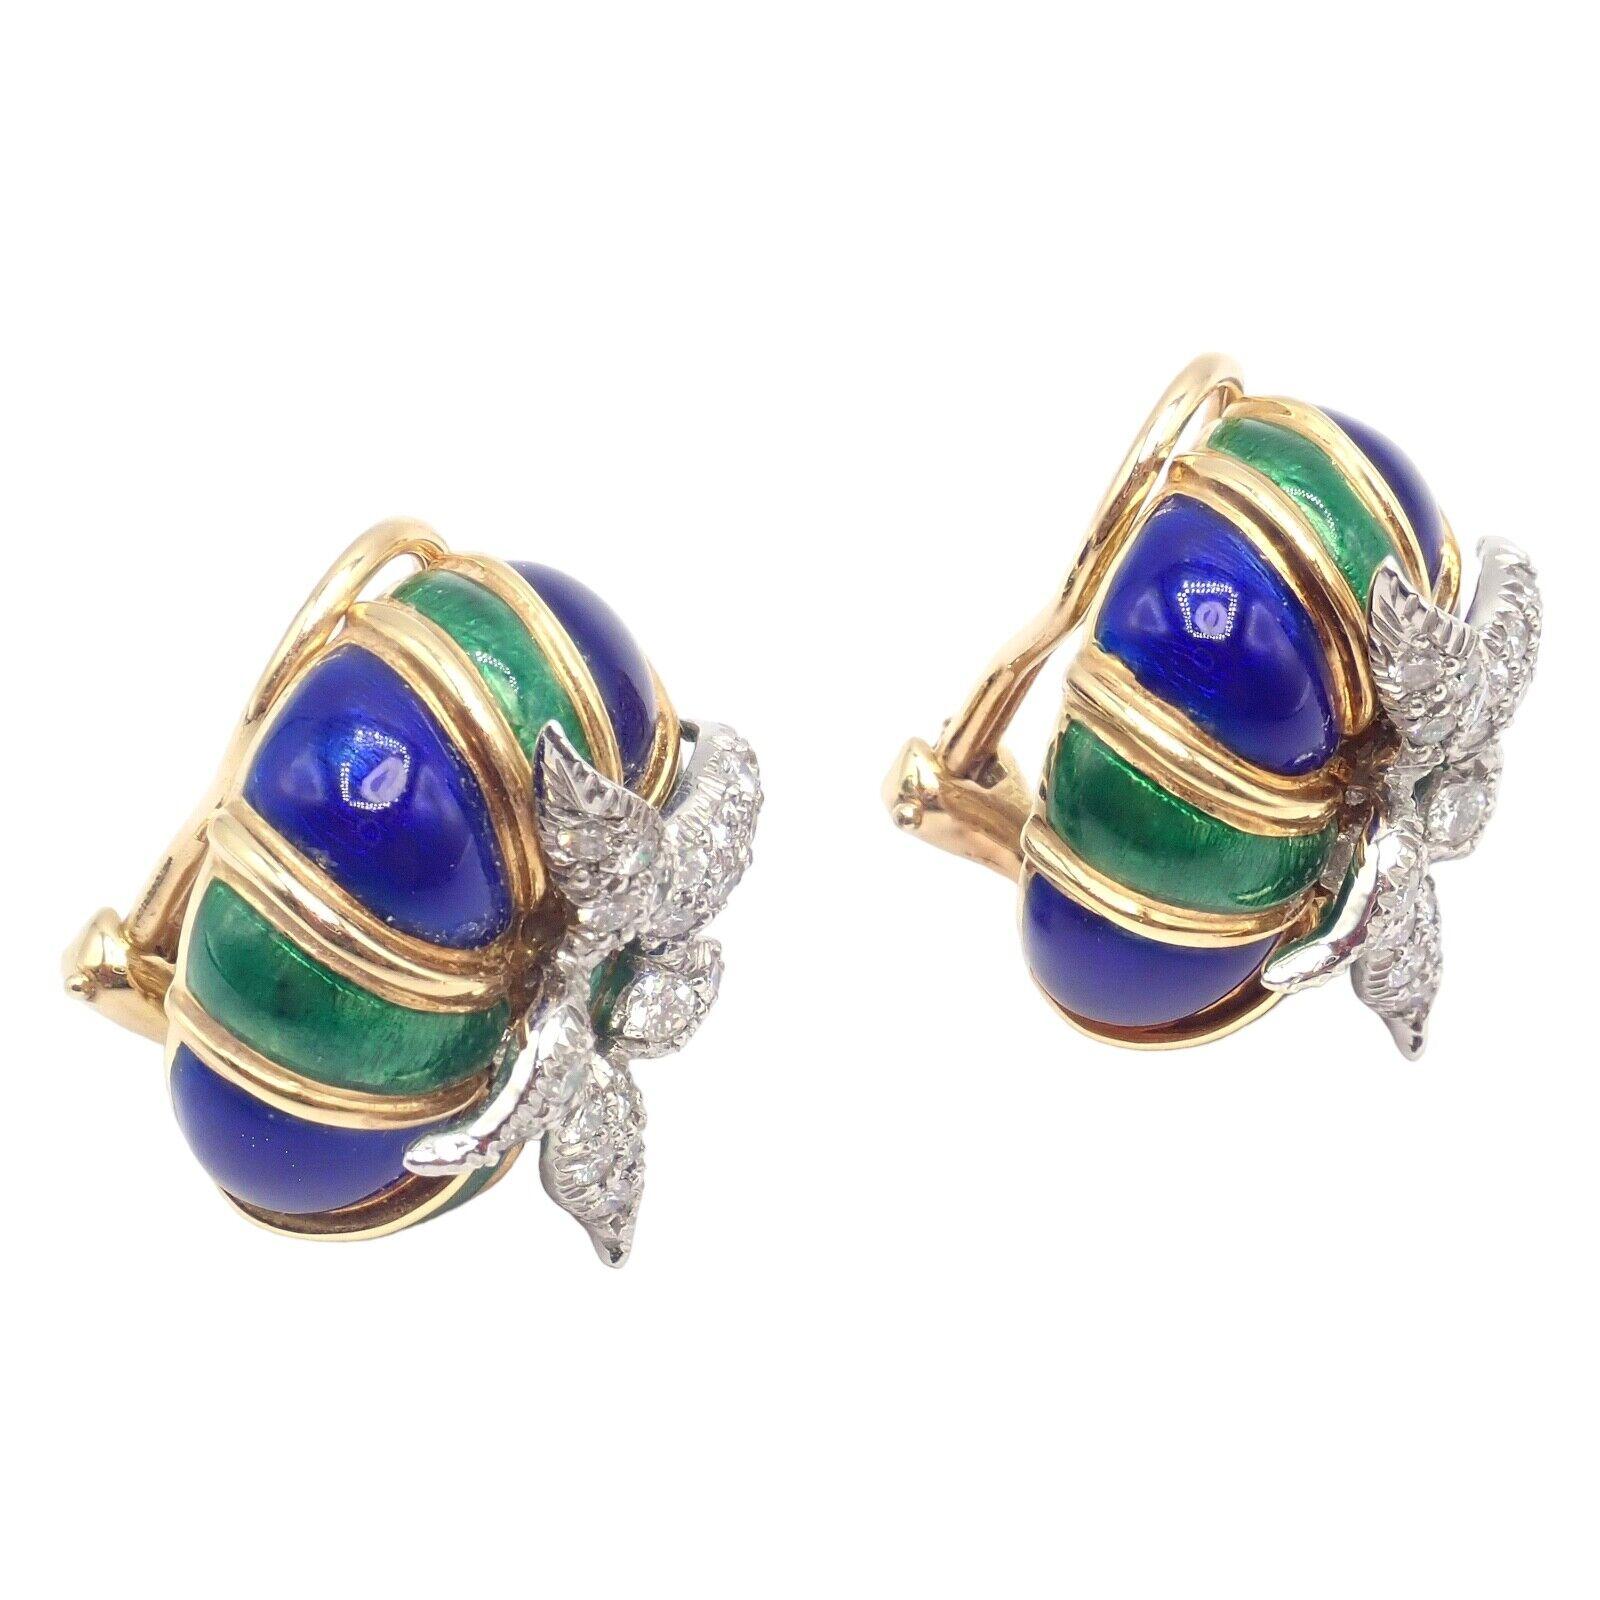 18k Yellow Gold Diamond Green And Blue Enamel Jean Schlumberger Earrings for Tiffany & Co. 
With 50 Round Brilliant Cut Diamonds VS1 clarity, G color total weight approximately 0.75ct
Blue and Green Enamel in great condition, no chips
These earrings